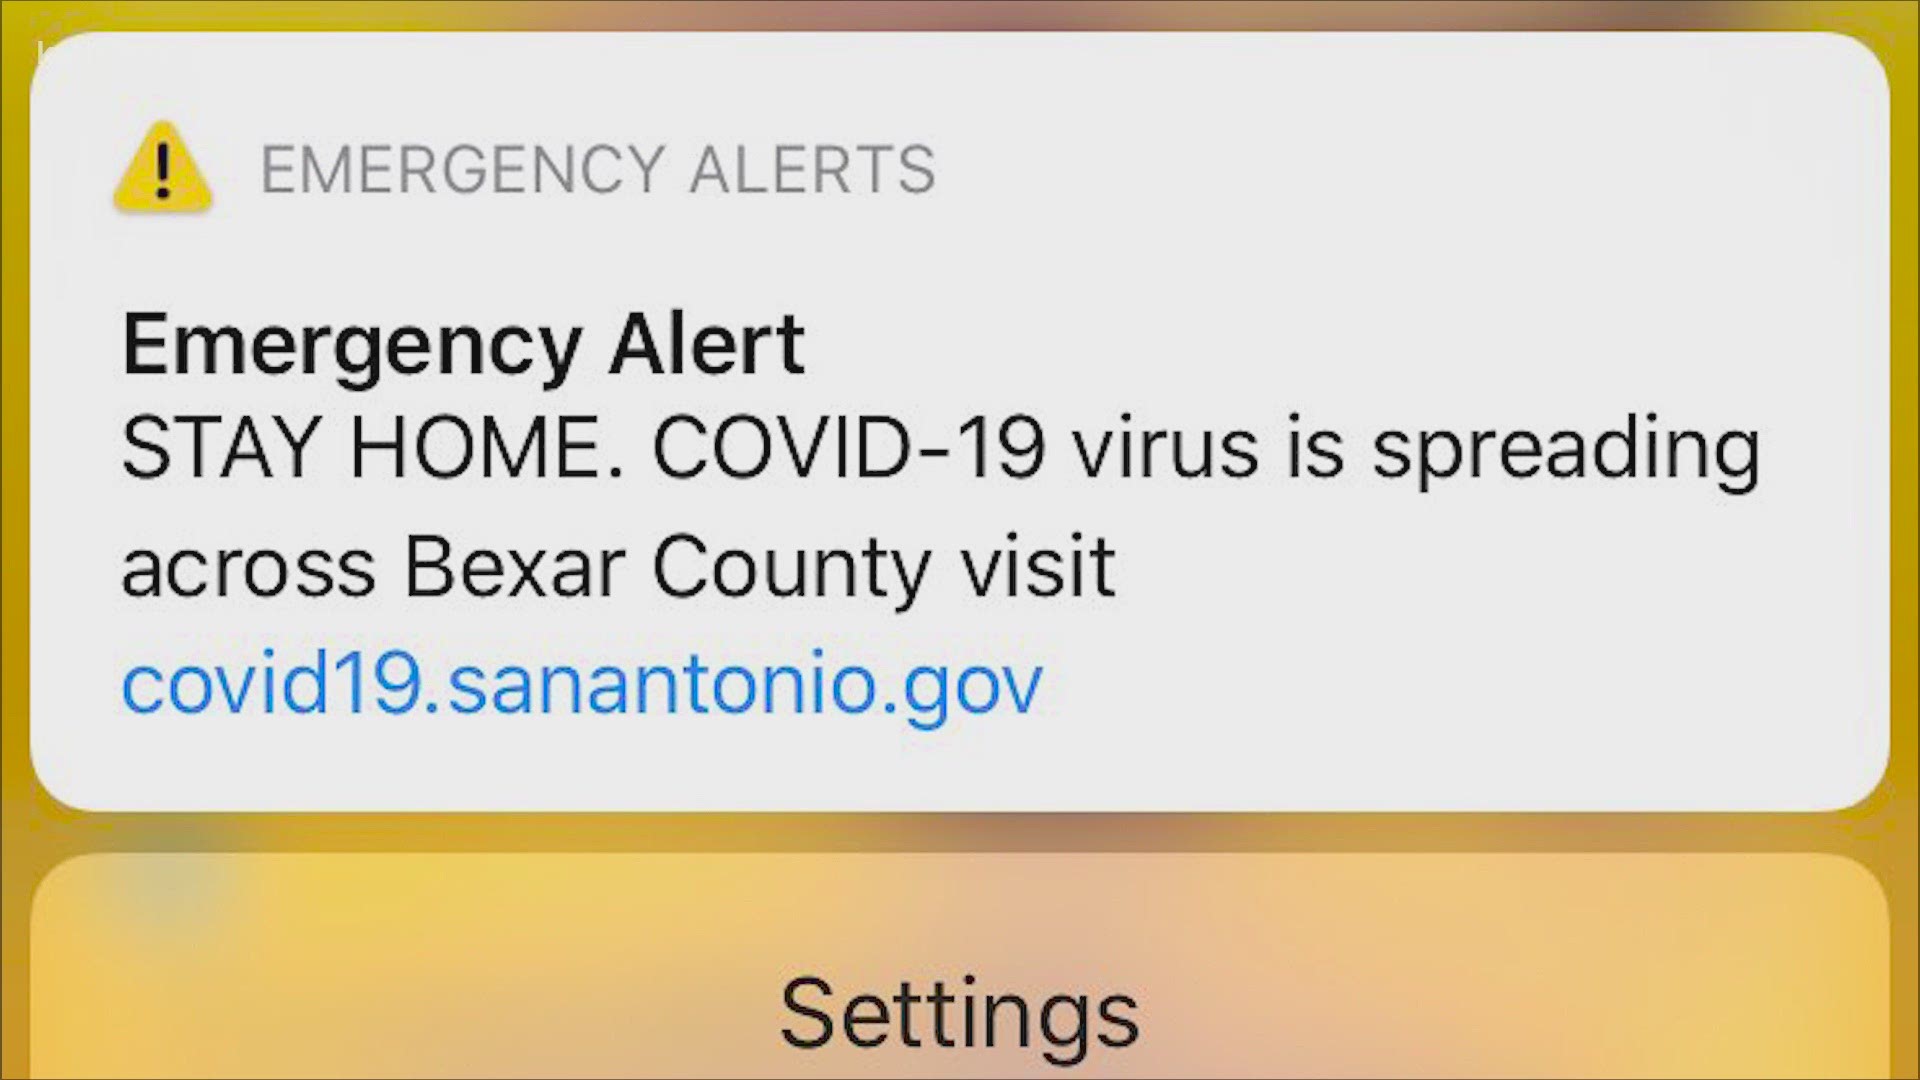 If you live in San Antonio or greater Bexar County area, you may have gotten an alert on your phone urging you to remain inside "except for essential activities."